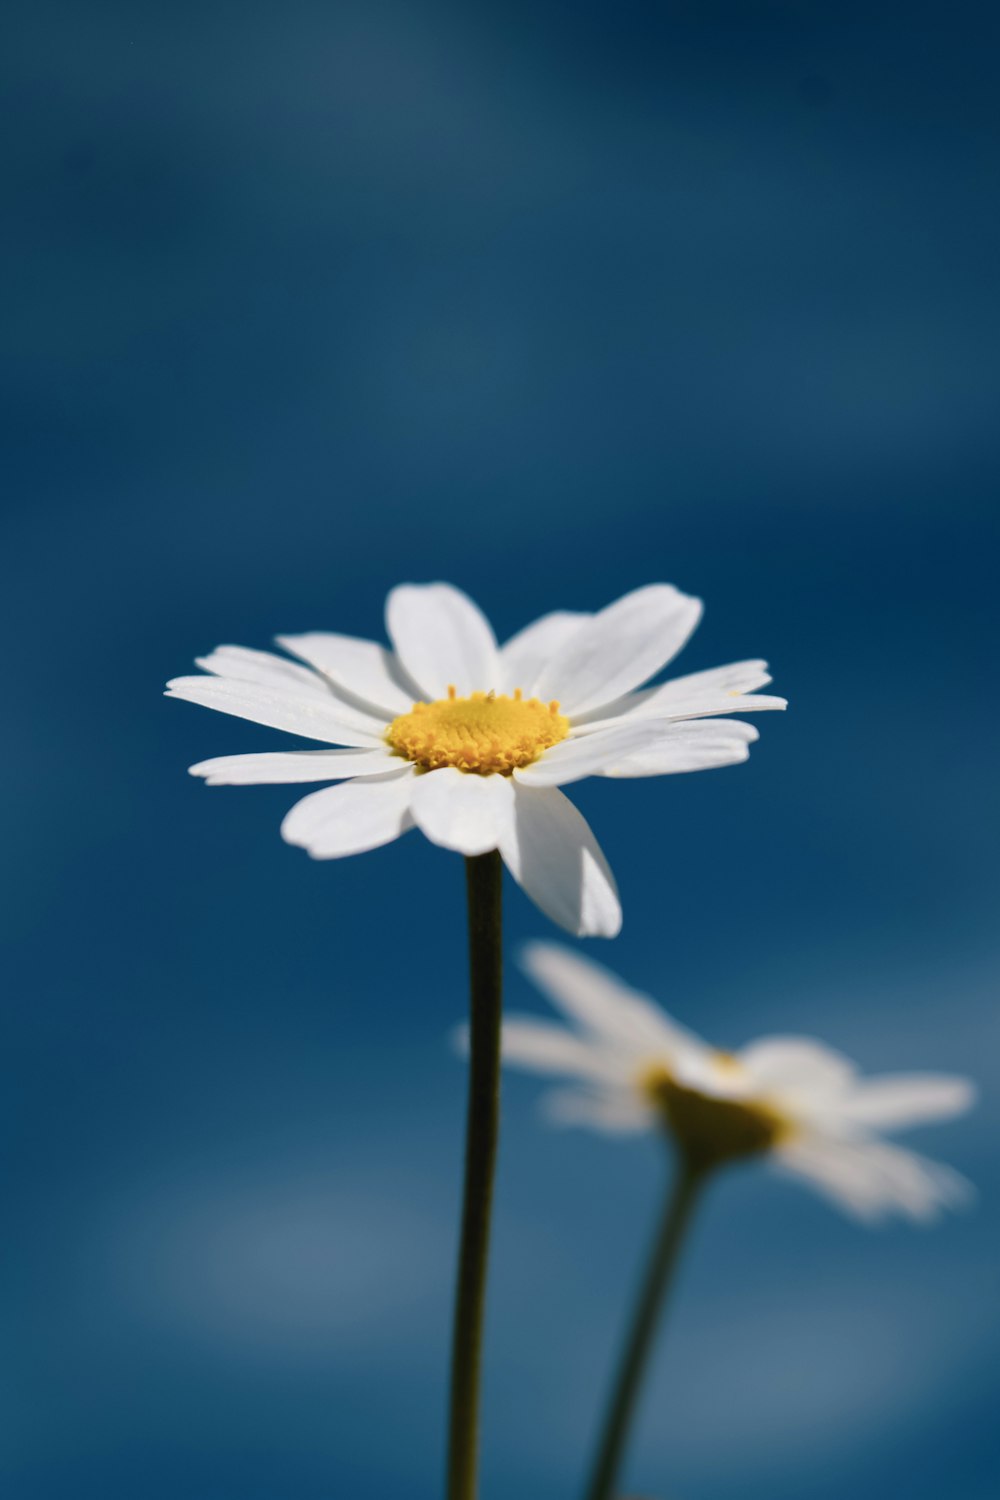 two white daisies with a blue sky in the background